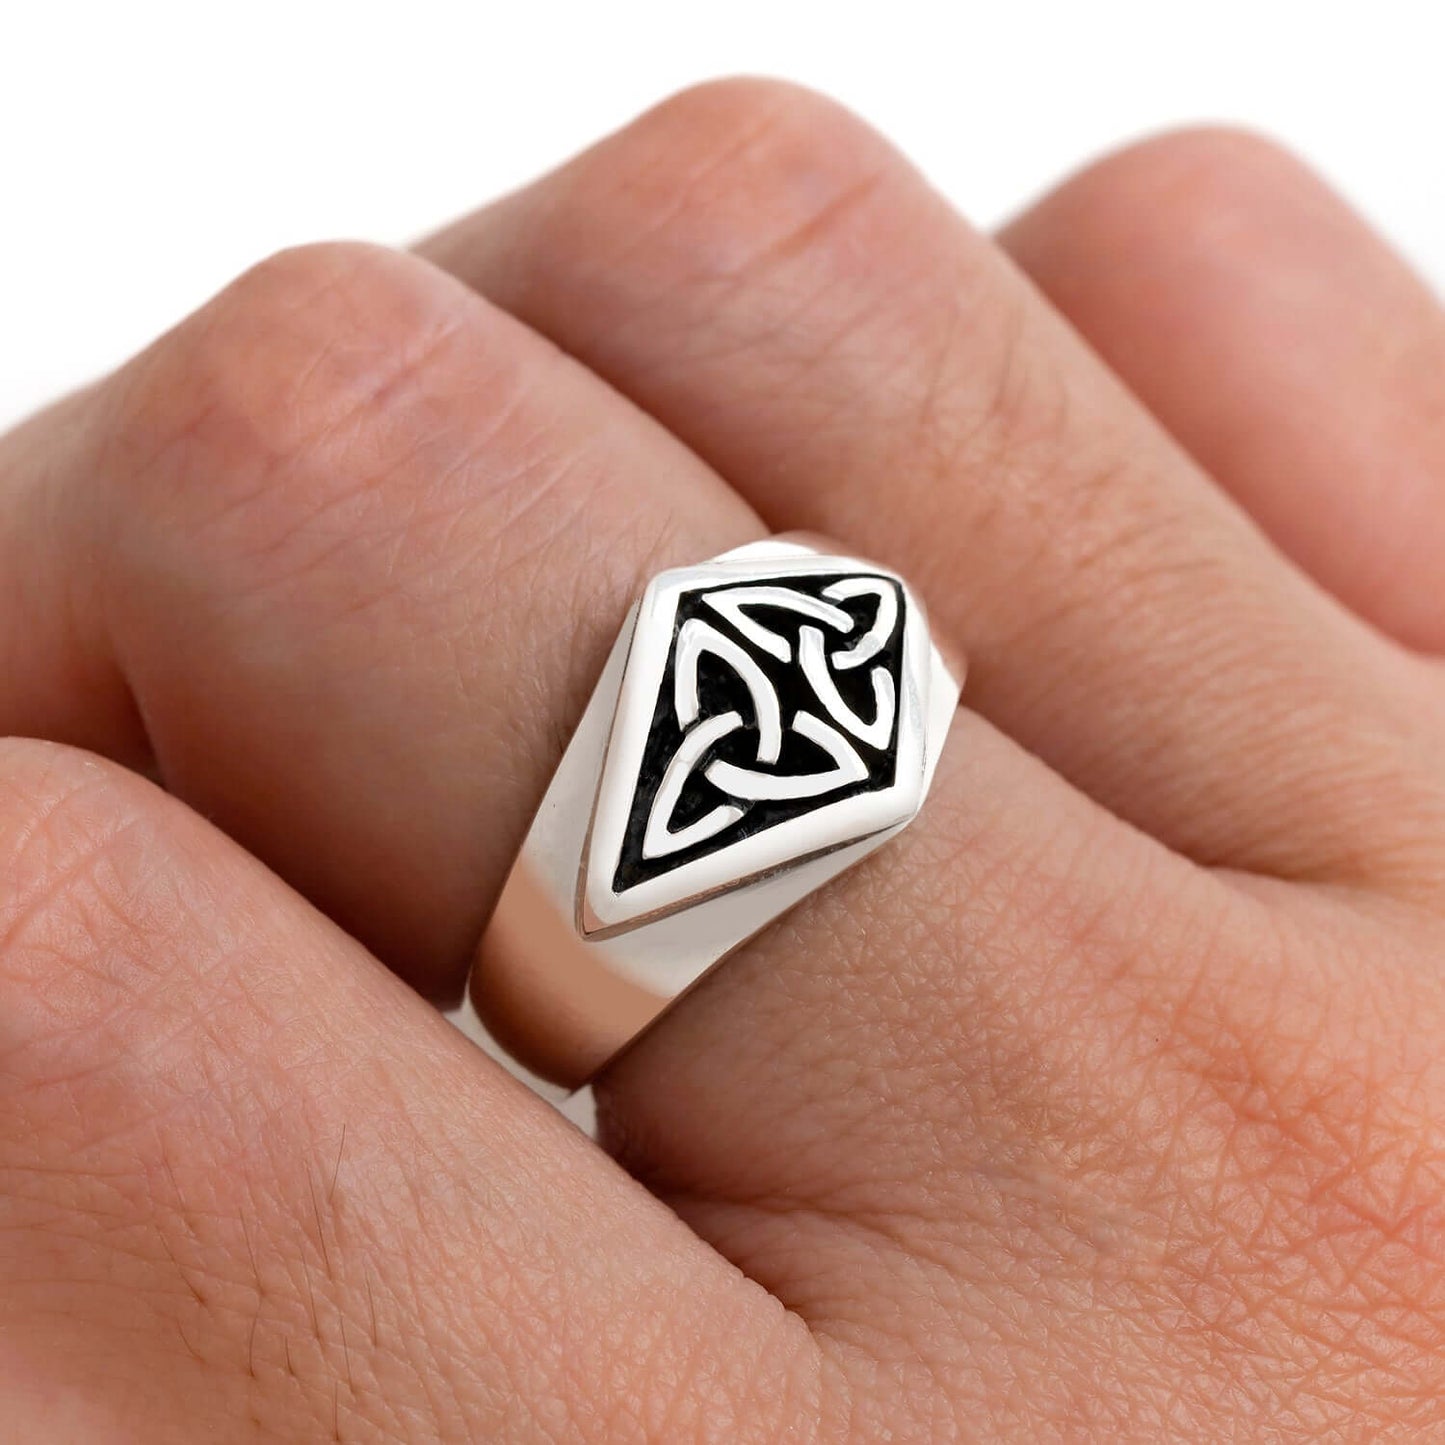 925 Sterling Silver Celtic Triquetra Ring - SilverMania925